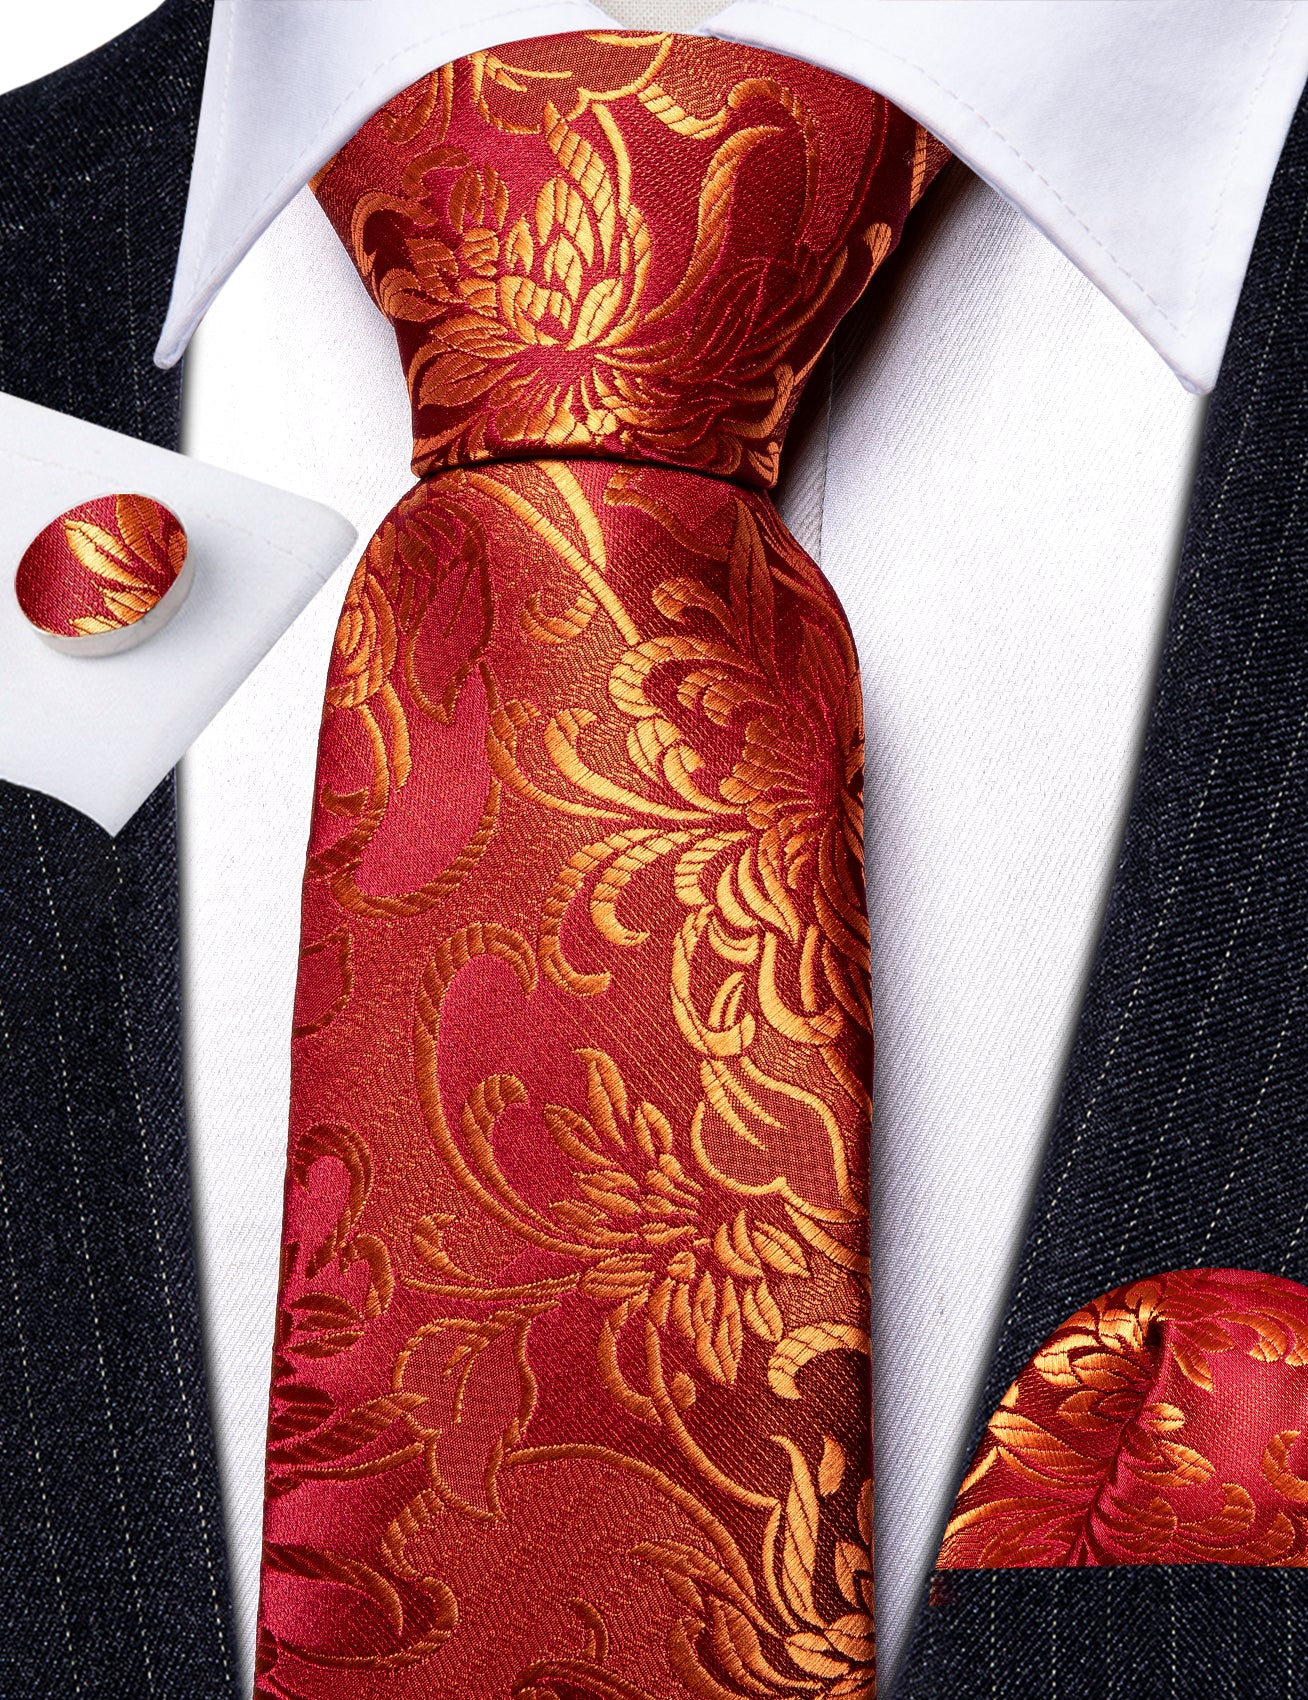 Barry.wang Floral Tie Red Gold Paisley Silk Tie Hanky Cufflinks Set